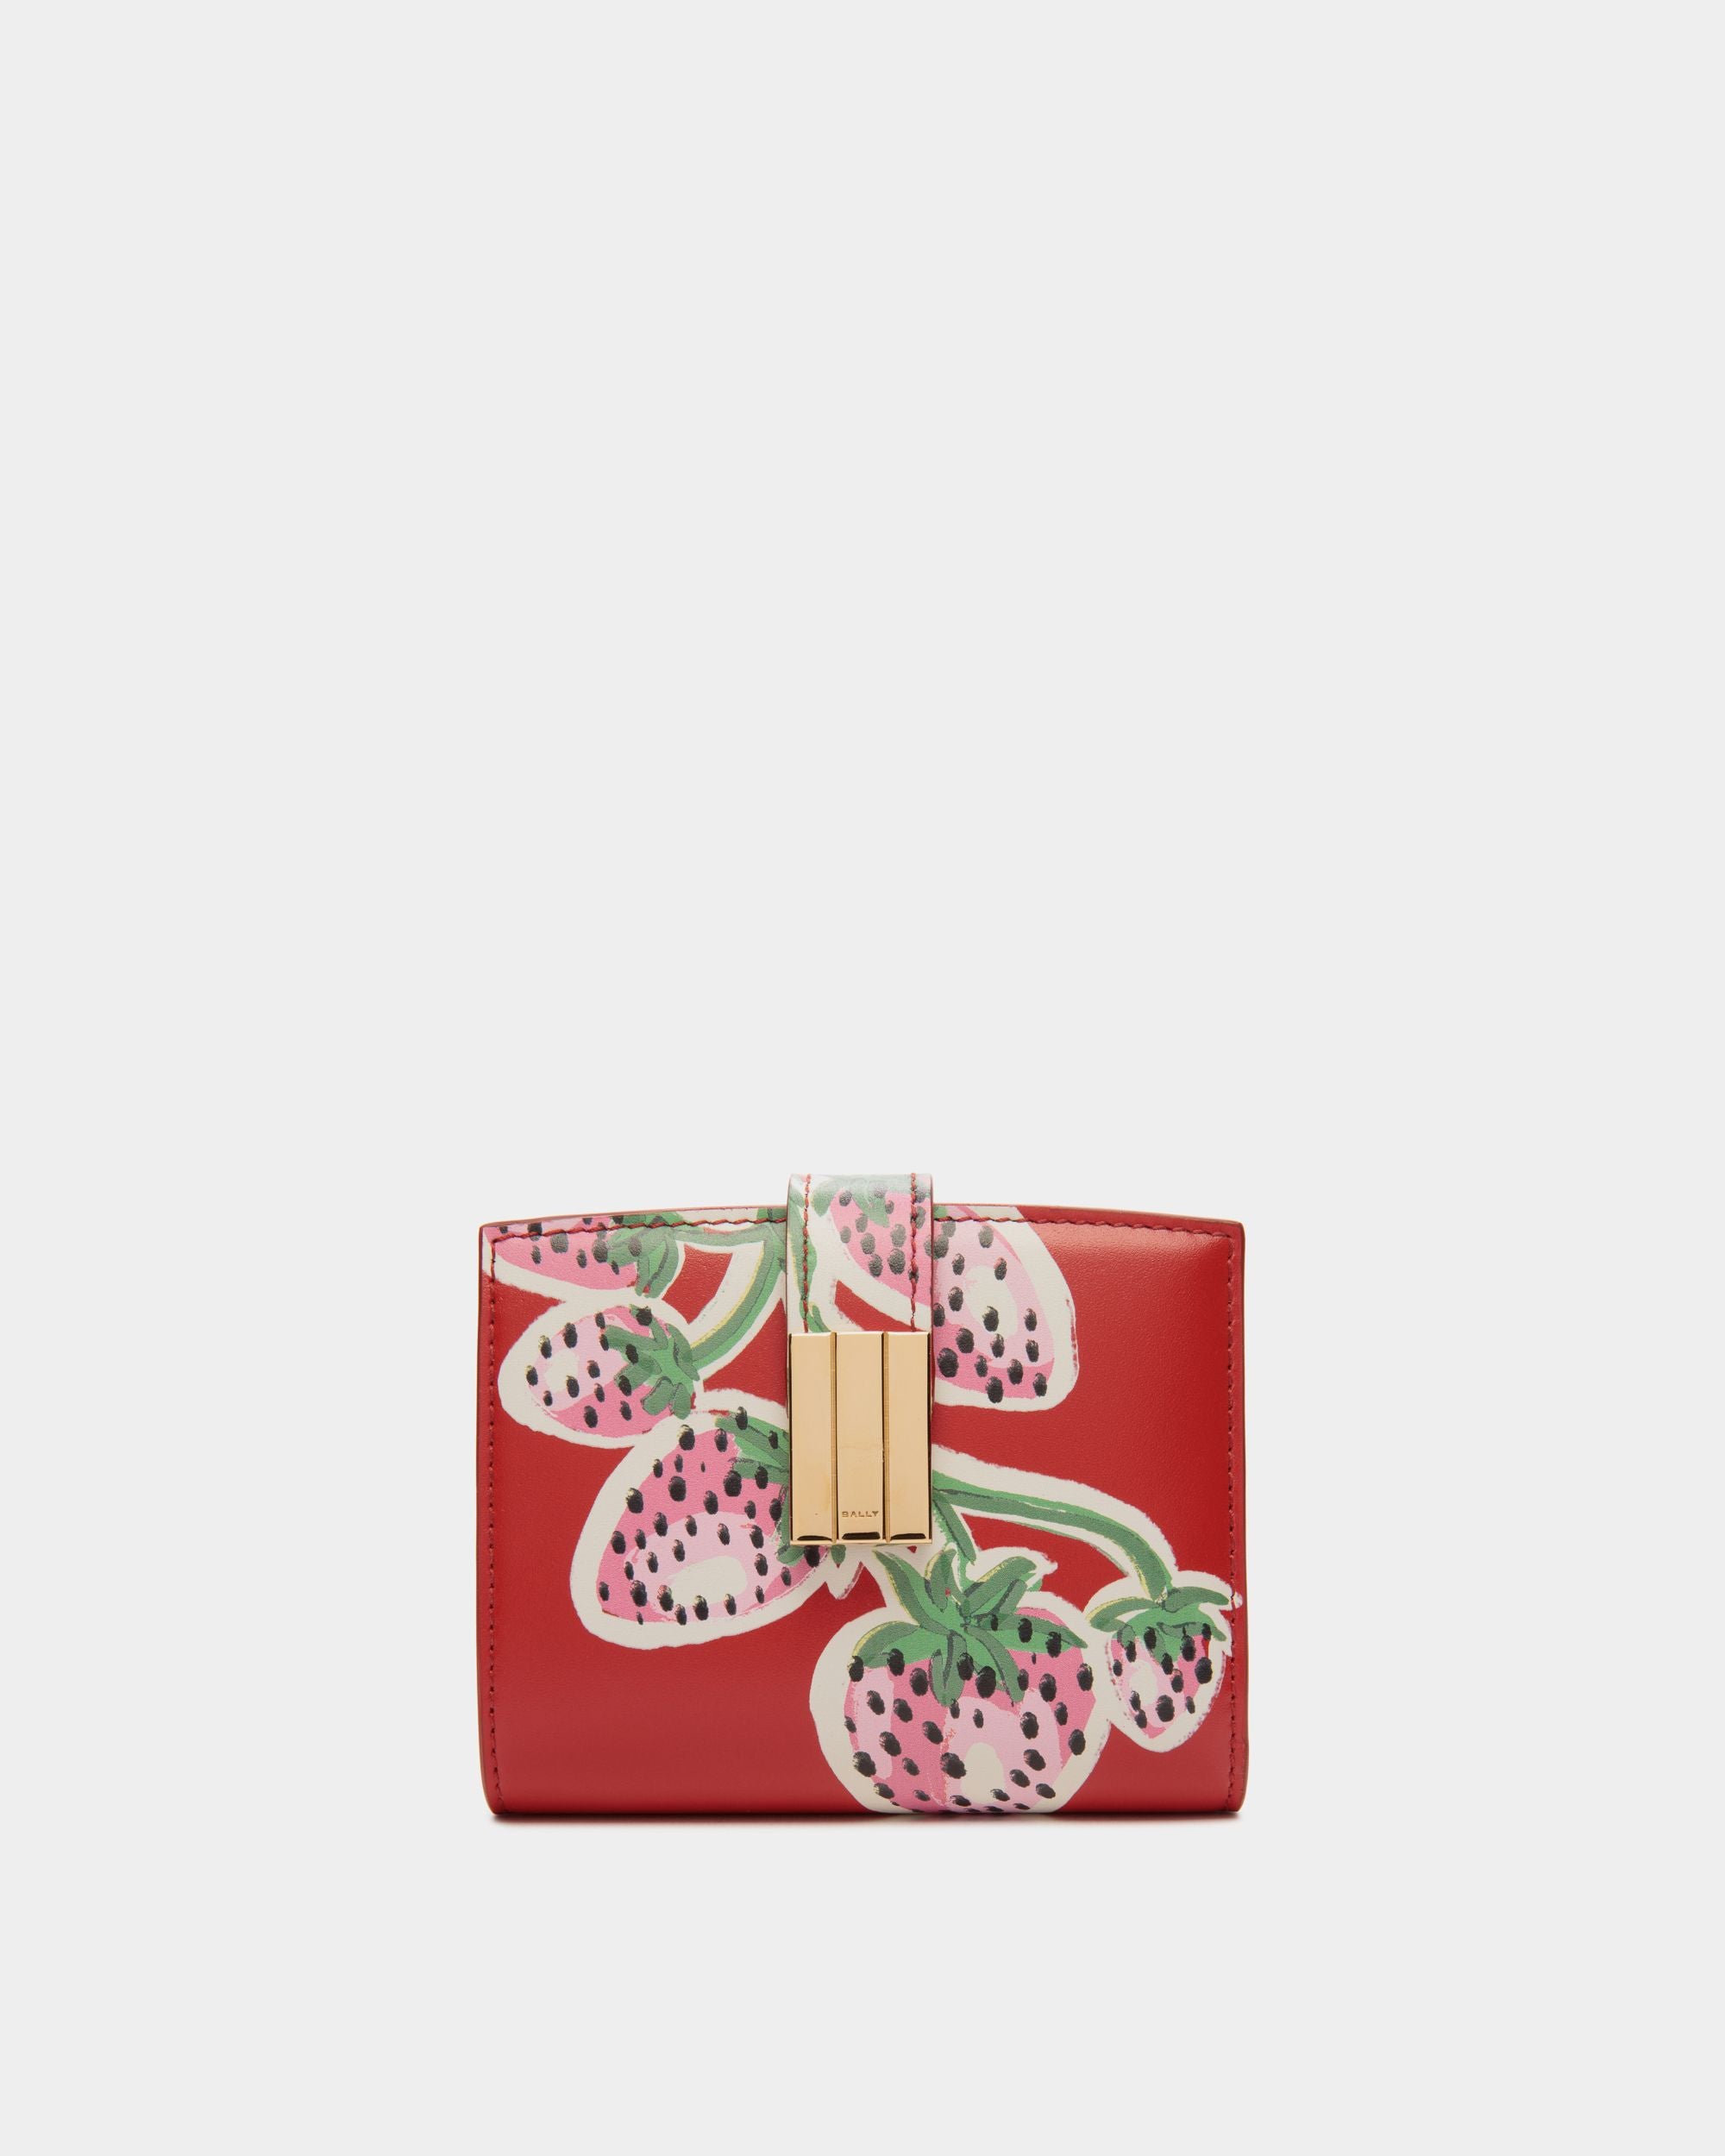 Ollam | Women's Wallet in Strawberry Print Leather | Bally | Still Life Front